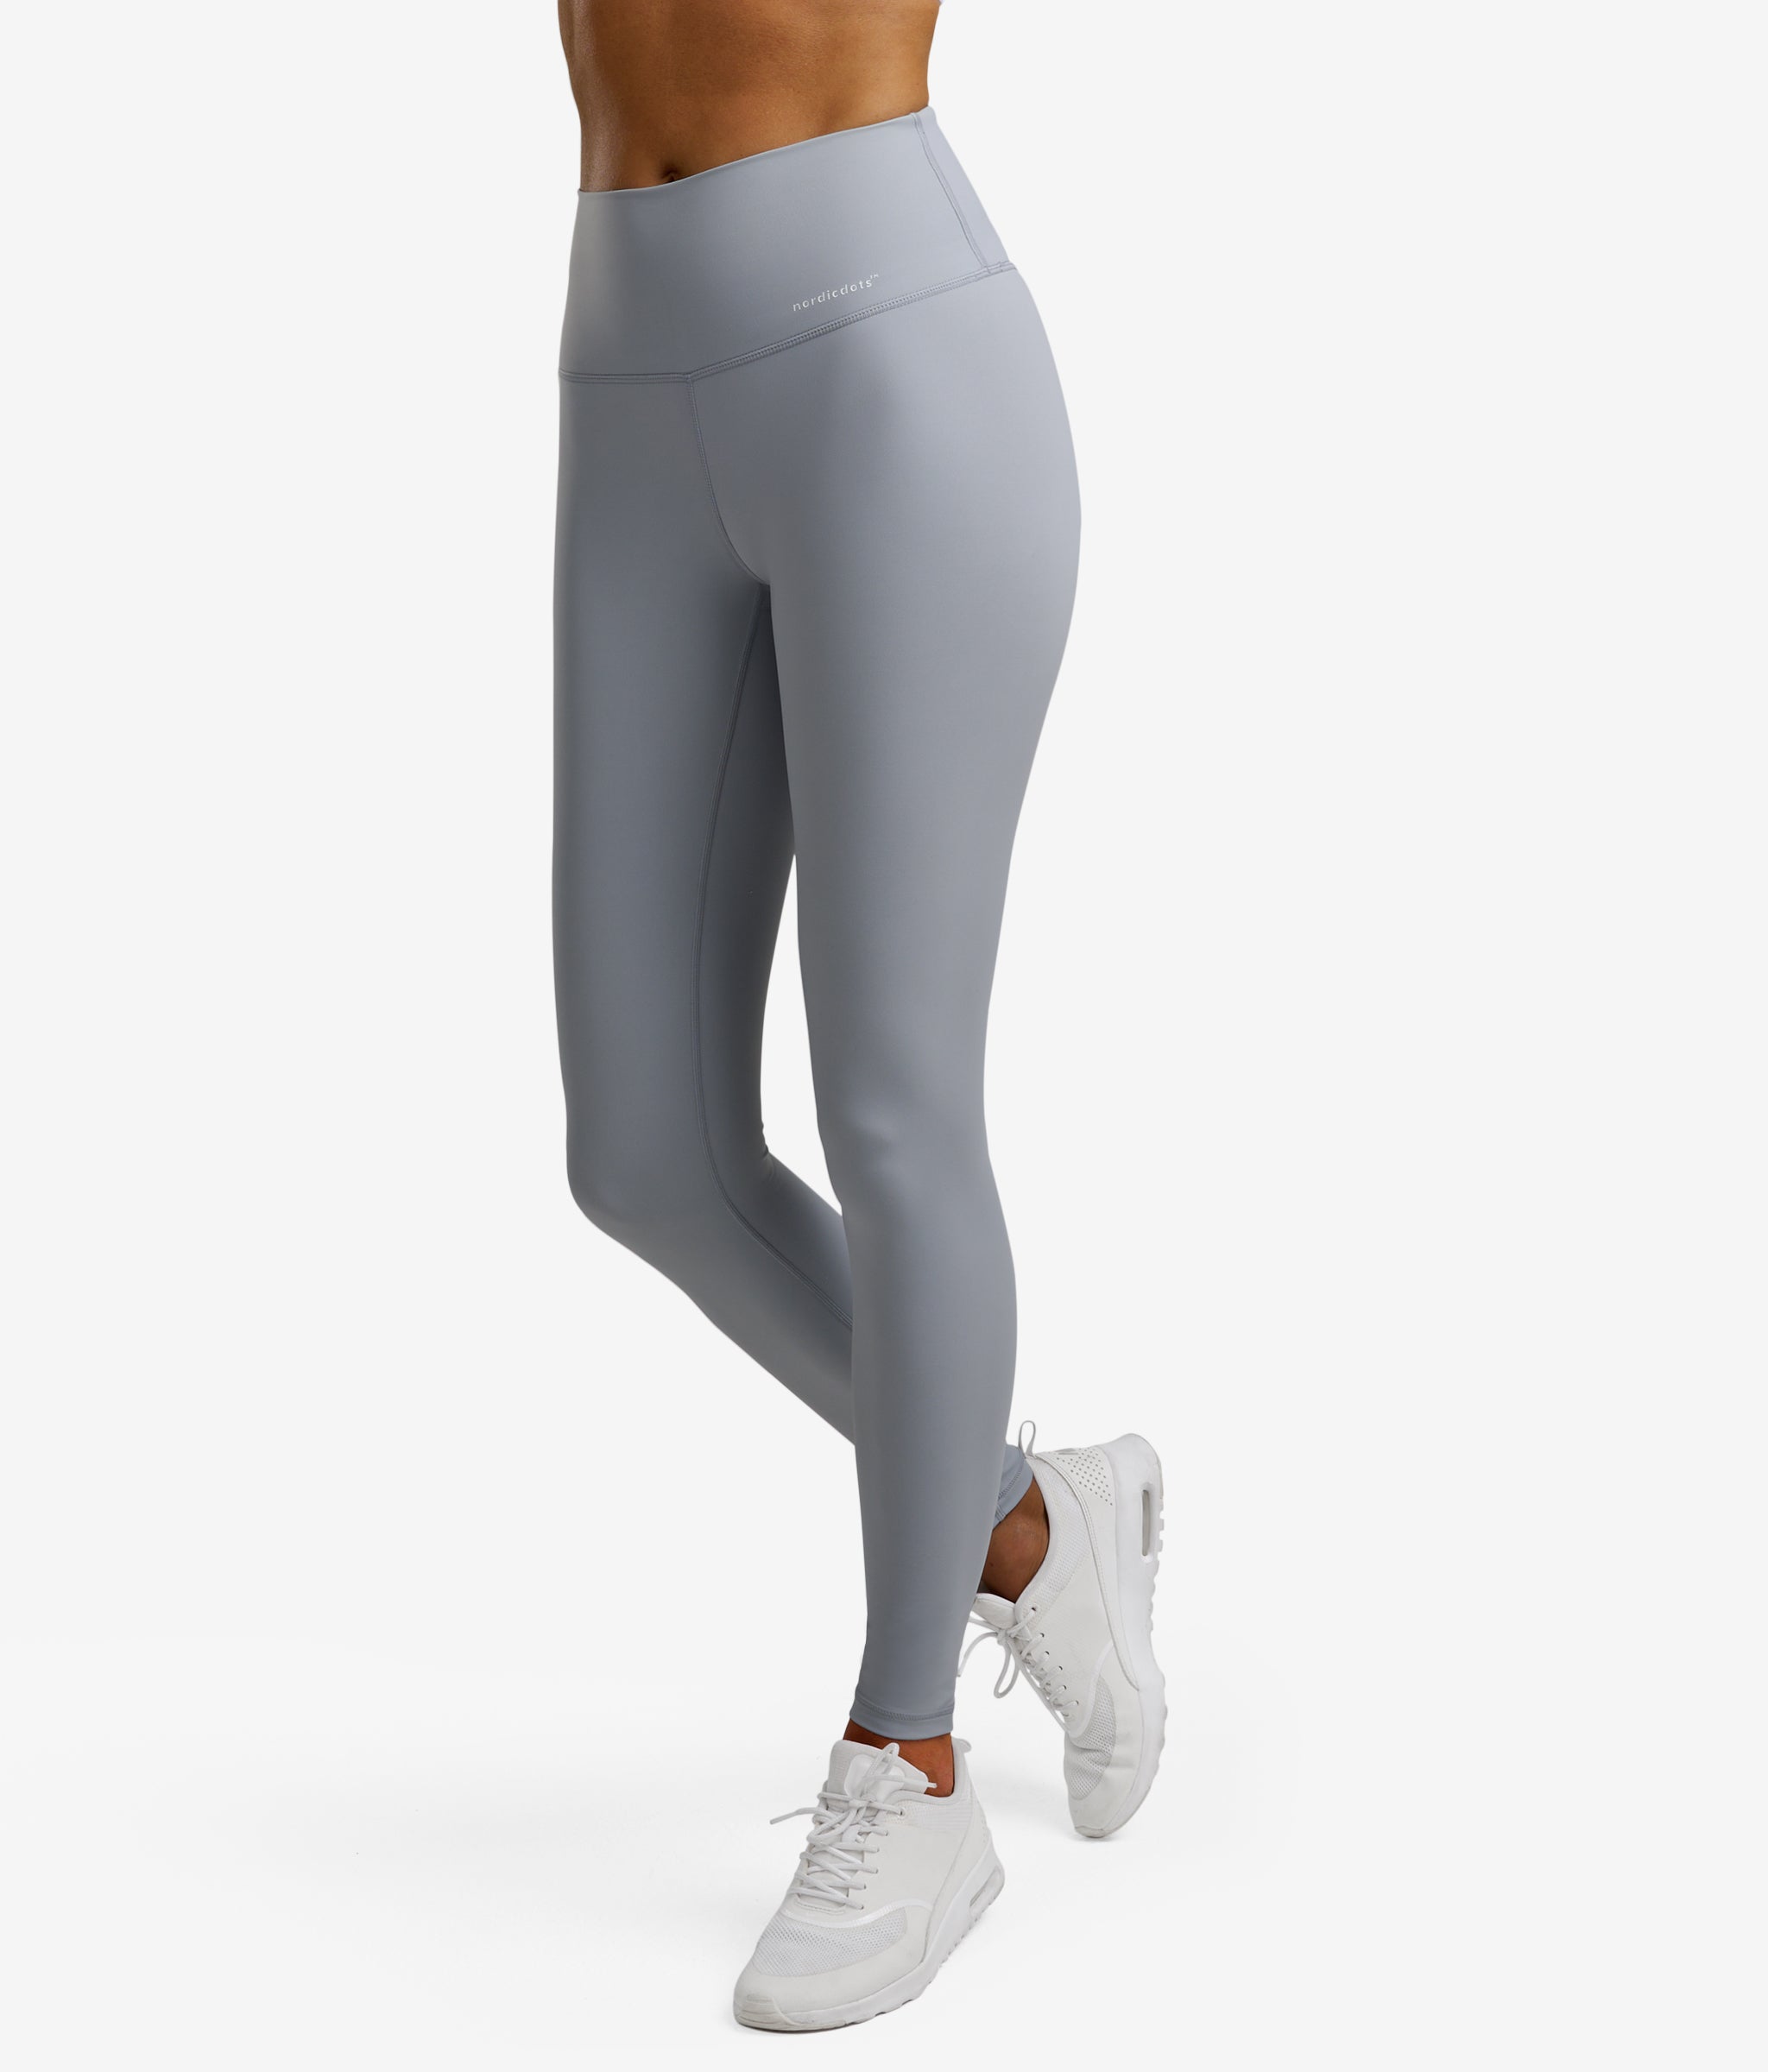 Shades of Grey Leggings with pockets